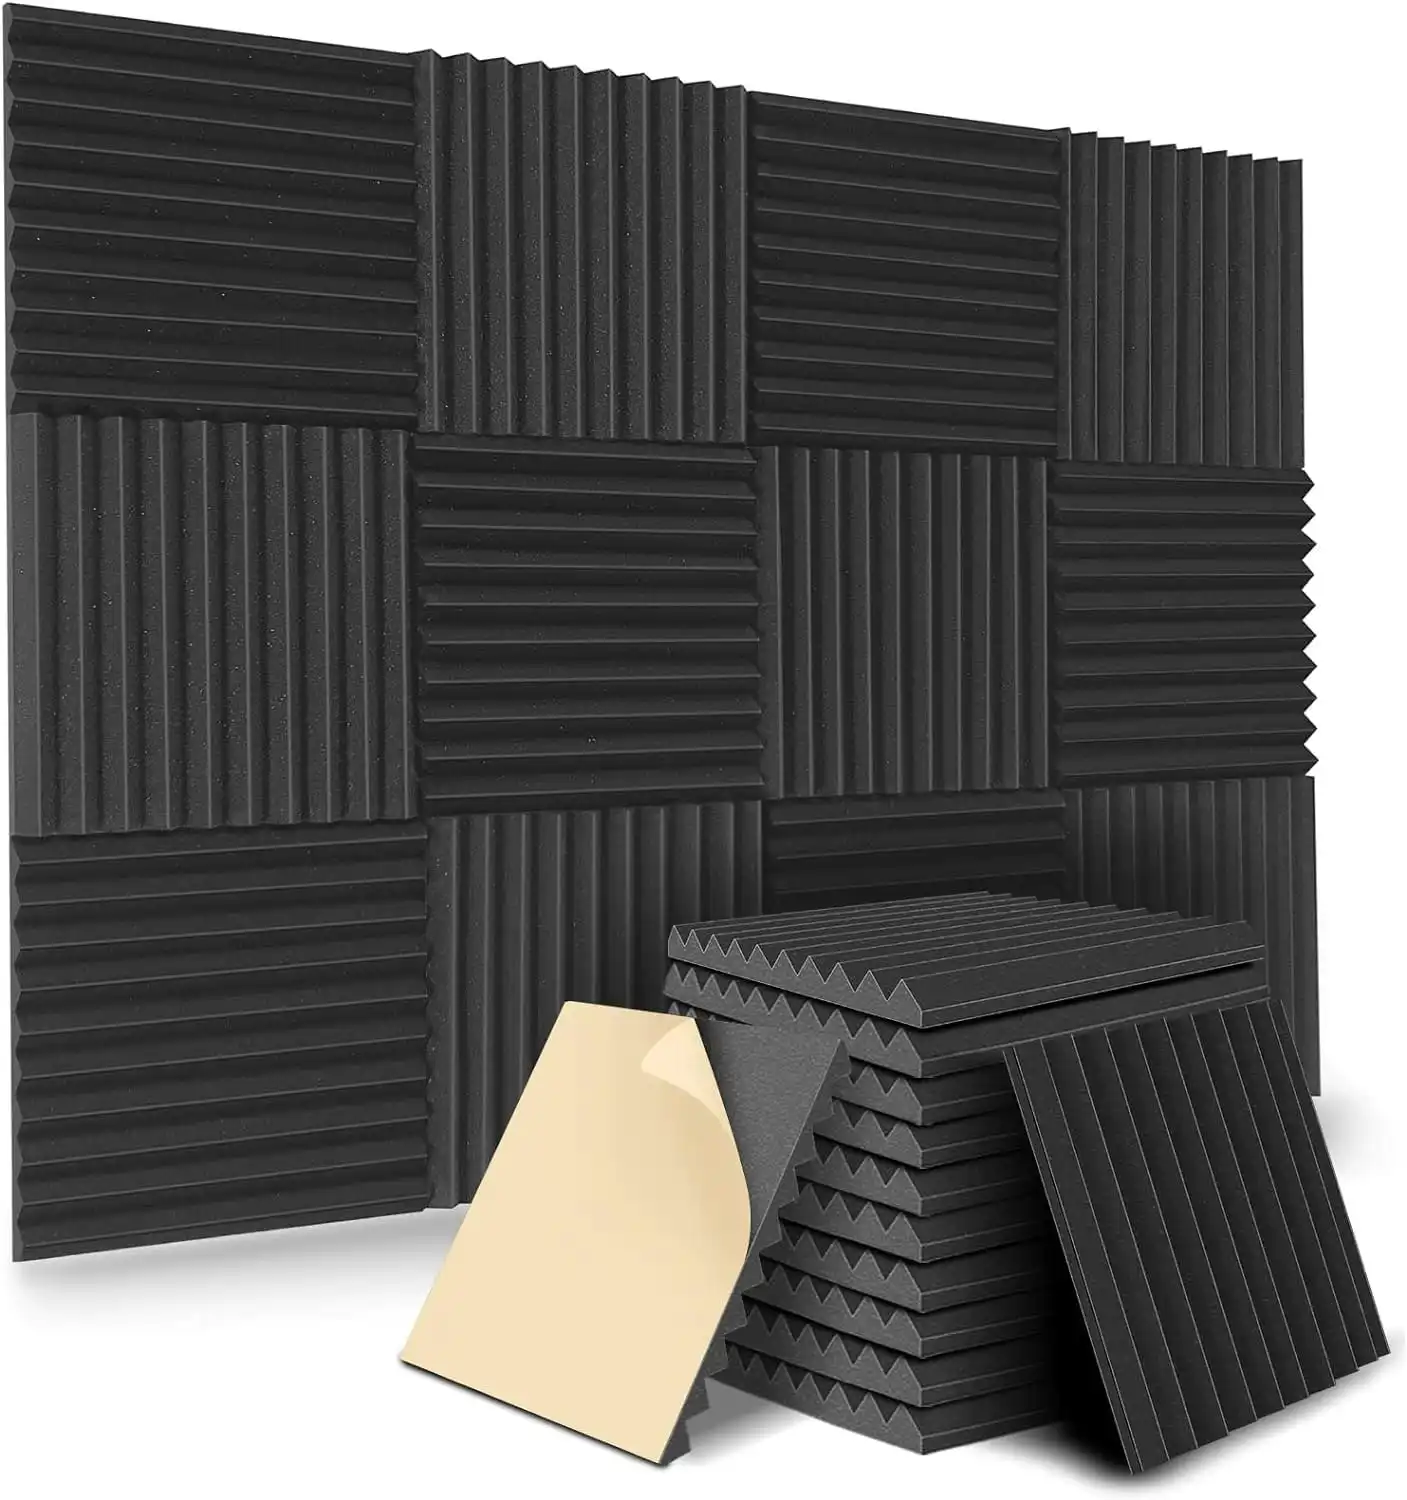 24 Pack| Self Adhesive Studio Acoustic Foam Sound Proofing Panel Strong Absorption (30cm x 30cm x 5cm)